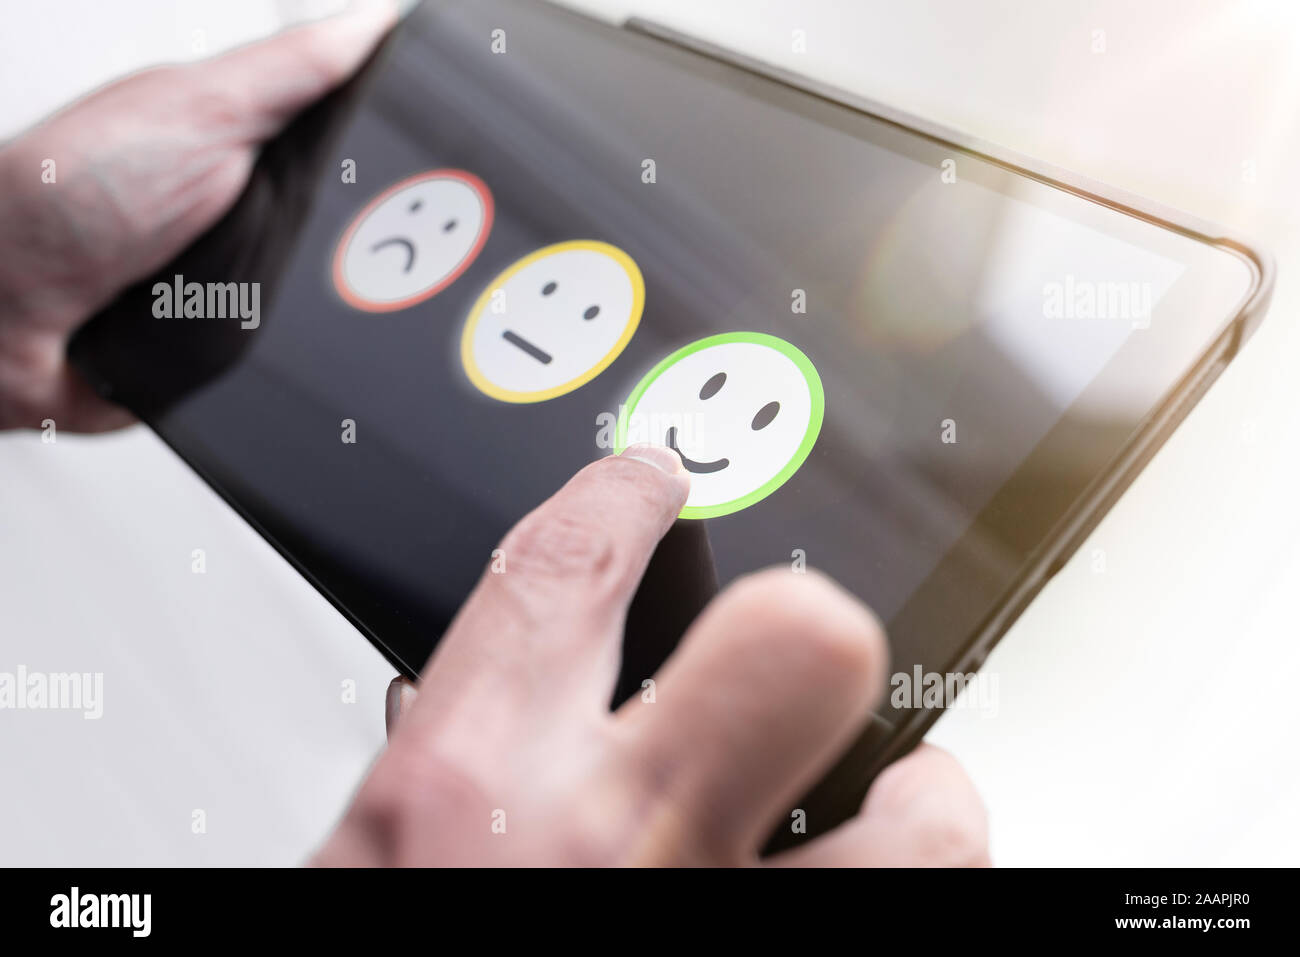 pleased person giving positive feedback by touching smiley face on digital tablet touchscreen, service quality rating concept. Stock Photo